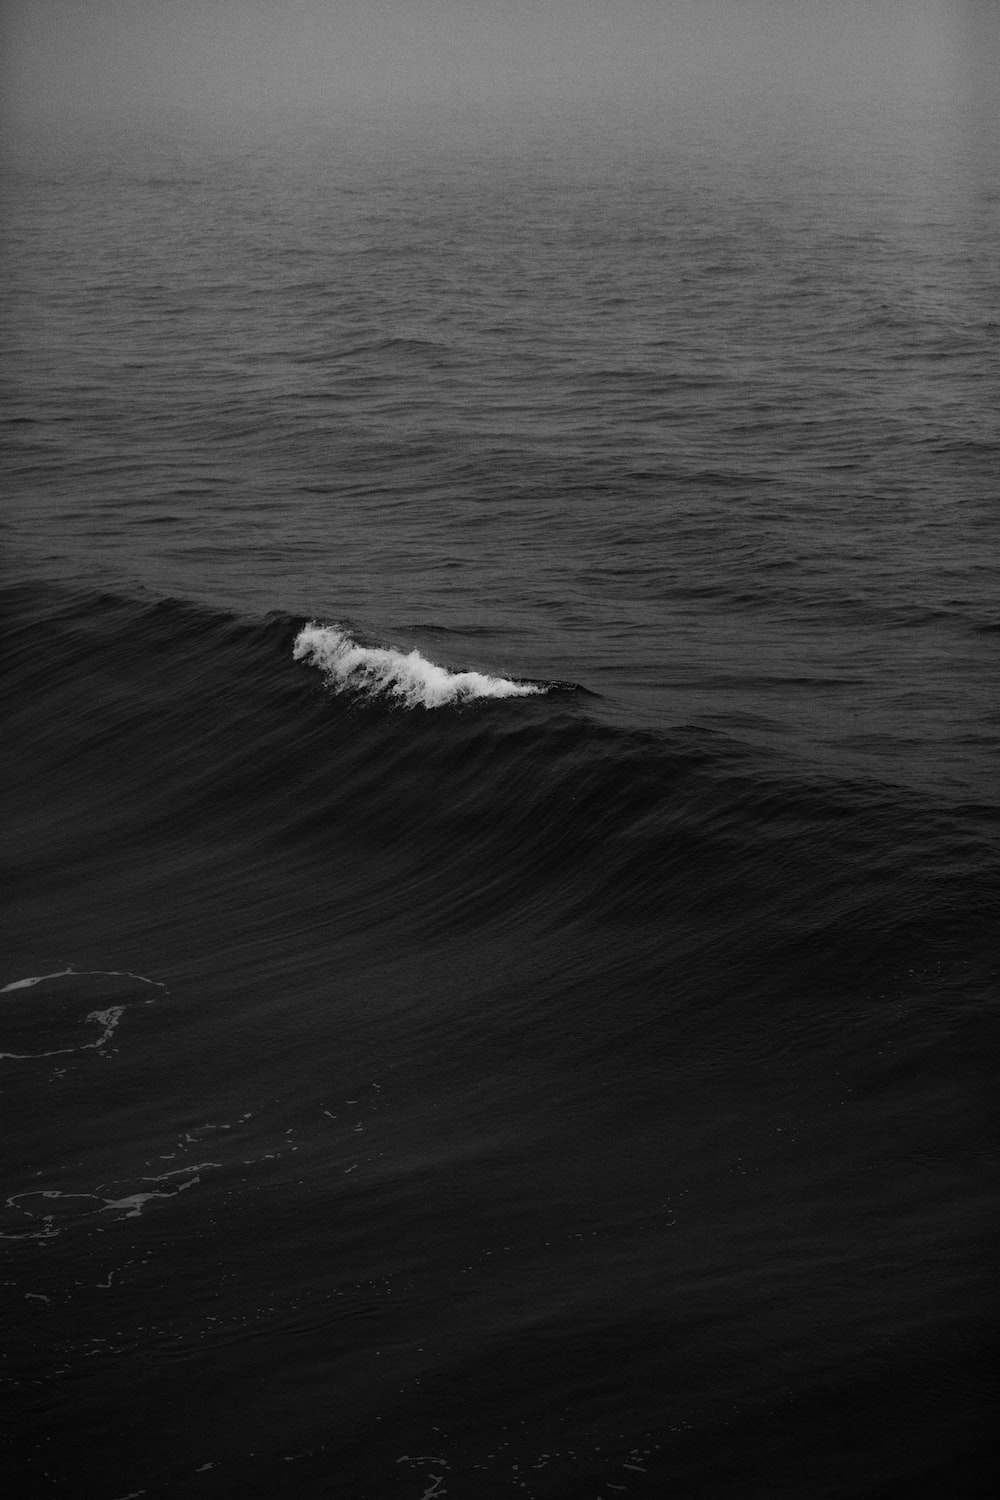 A black and white photo of a small wave in the ocean - Gray